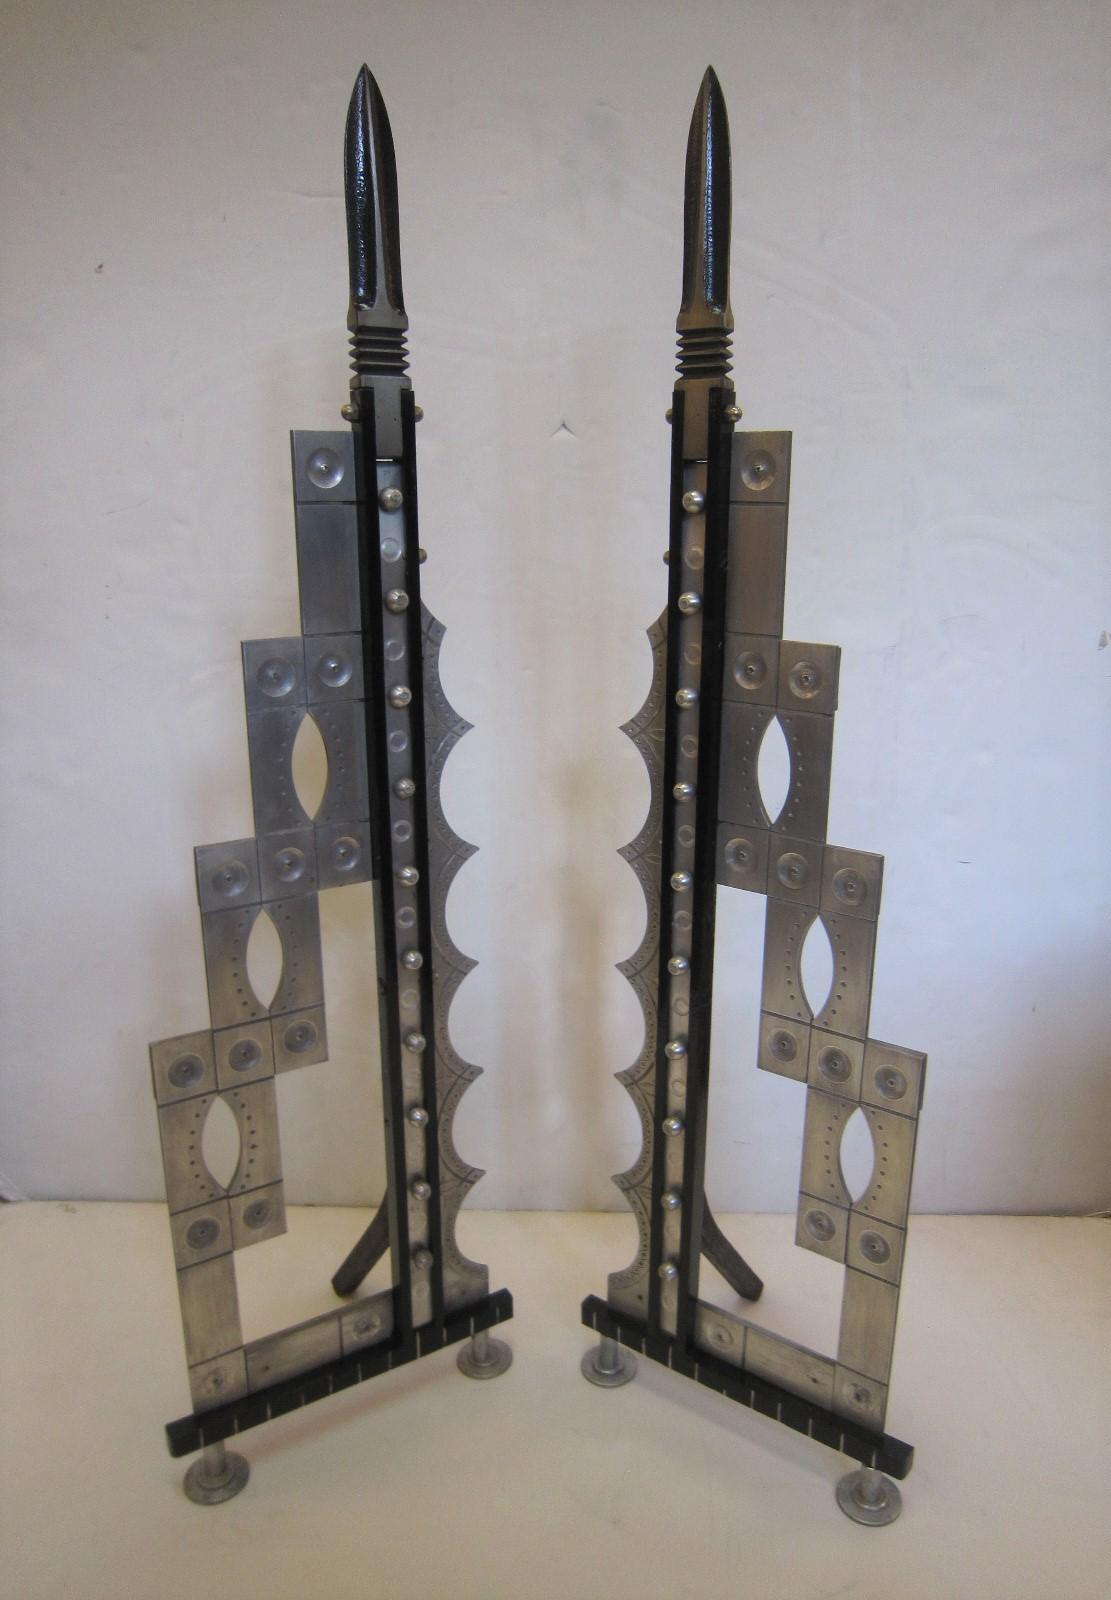 Pair of large Art Deco revival handcrafted spear head andirons in steel and iron.
A highly unusual pair with lovely details that feature design influences combining architectural elements, skyscraper, stepped motif, arts and crafts and modernist